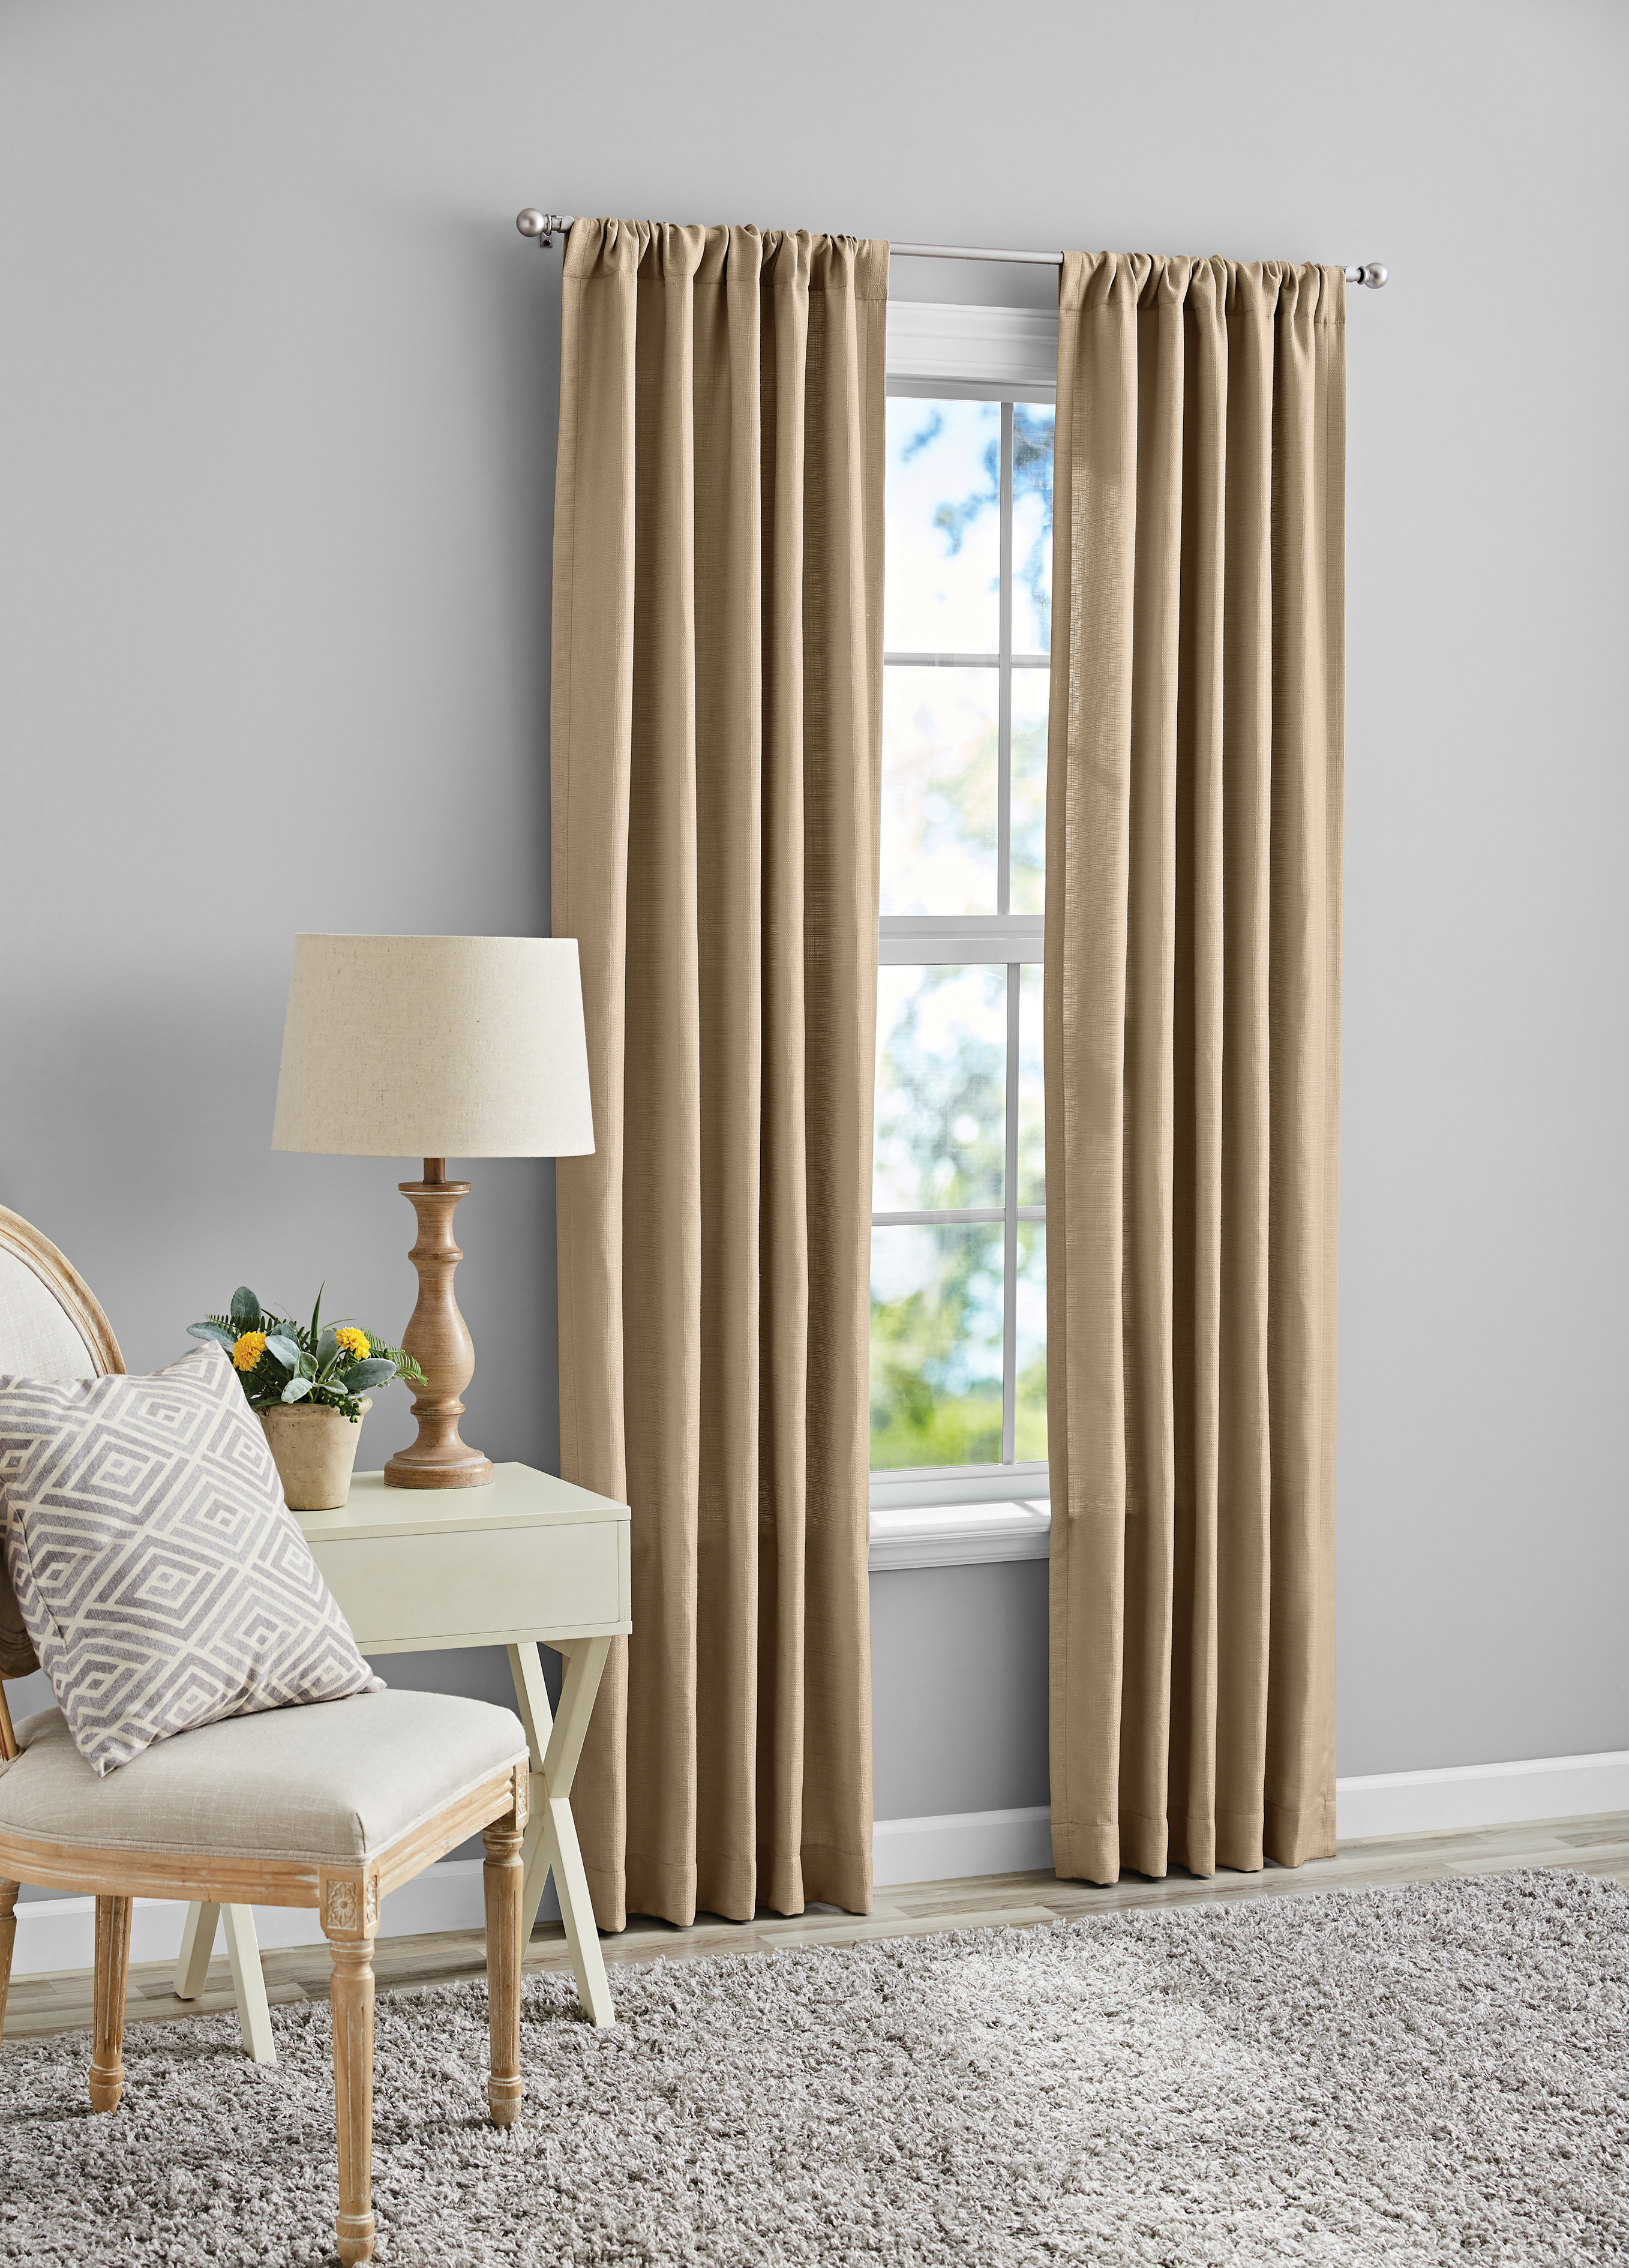 Mainstays Southport Solid Color Light Filtering Rod Pocket Curtain Panel Pair, Set of 2, Beige, 40 x 84 - image 1 of 7